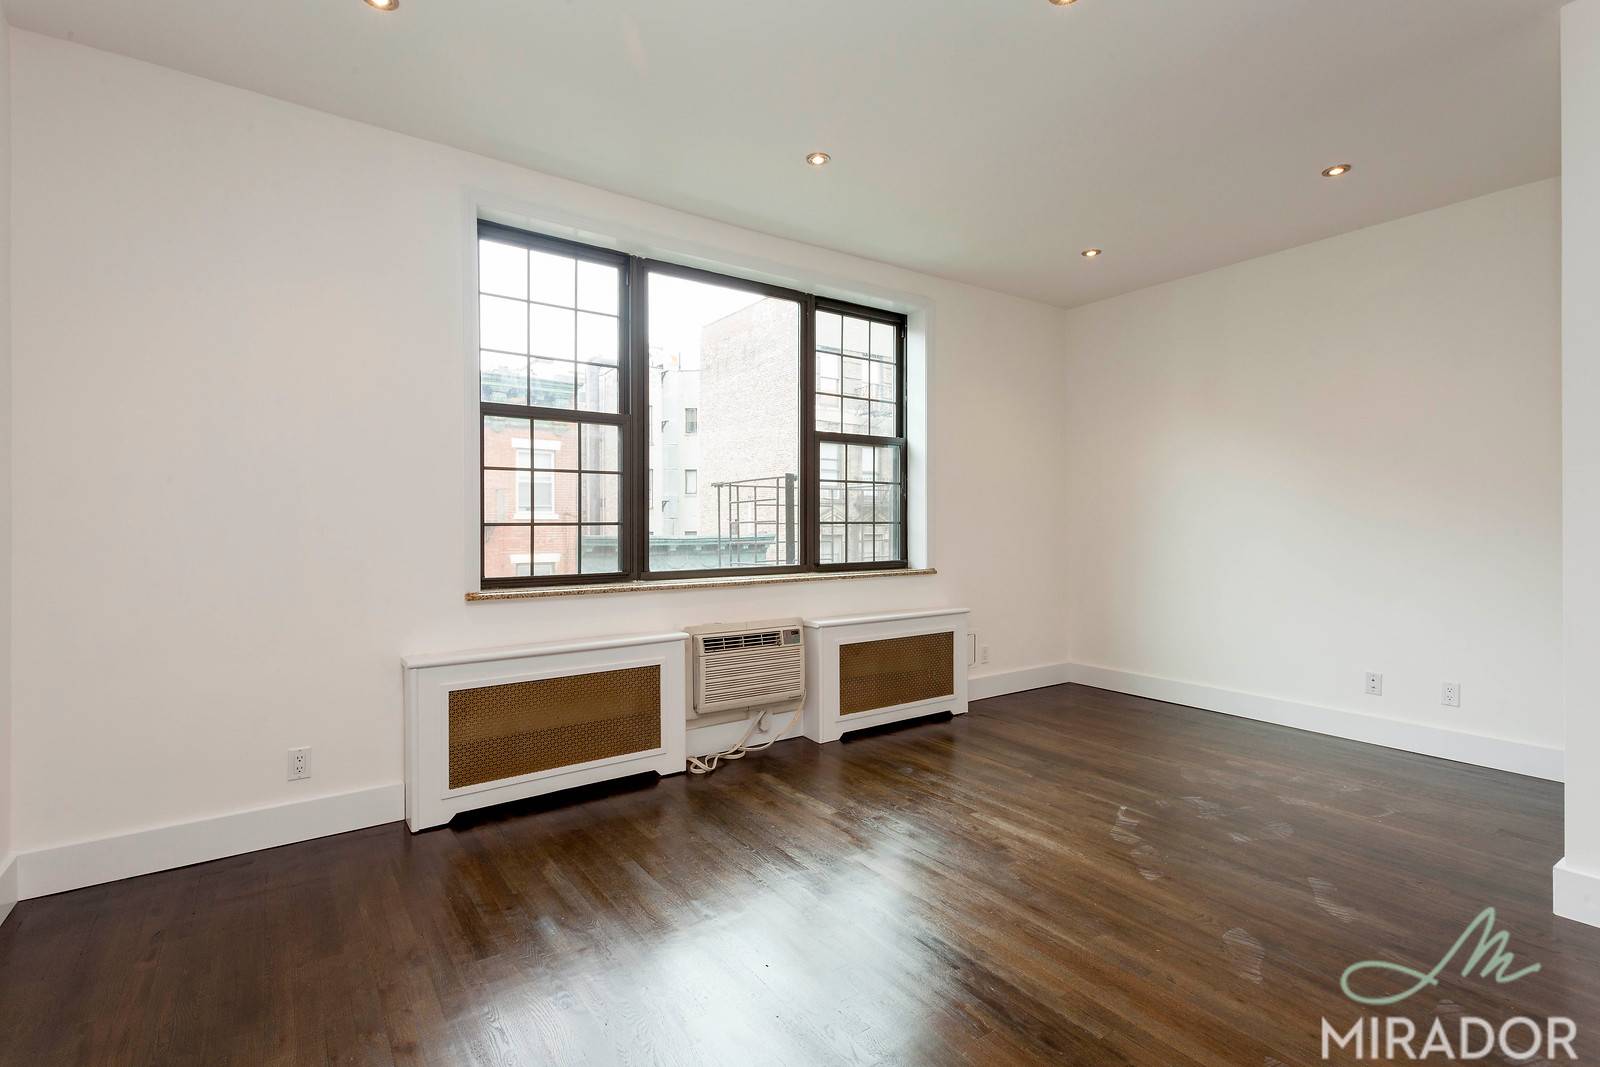 A massive private roof deck sits atop this airy alcove studio in a prime SoHo location.